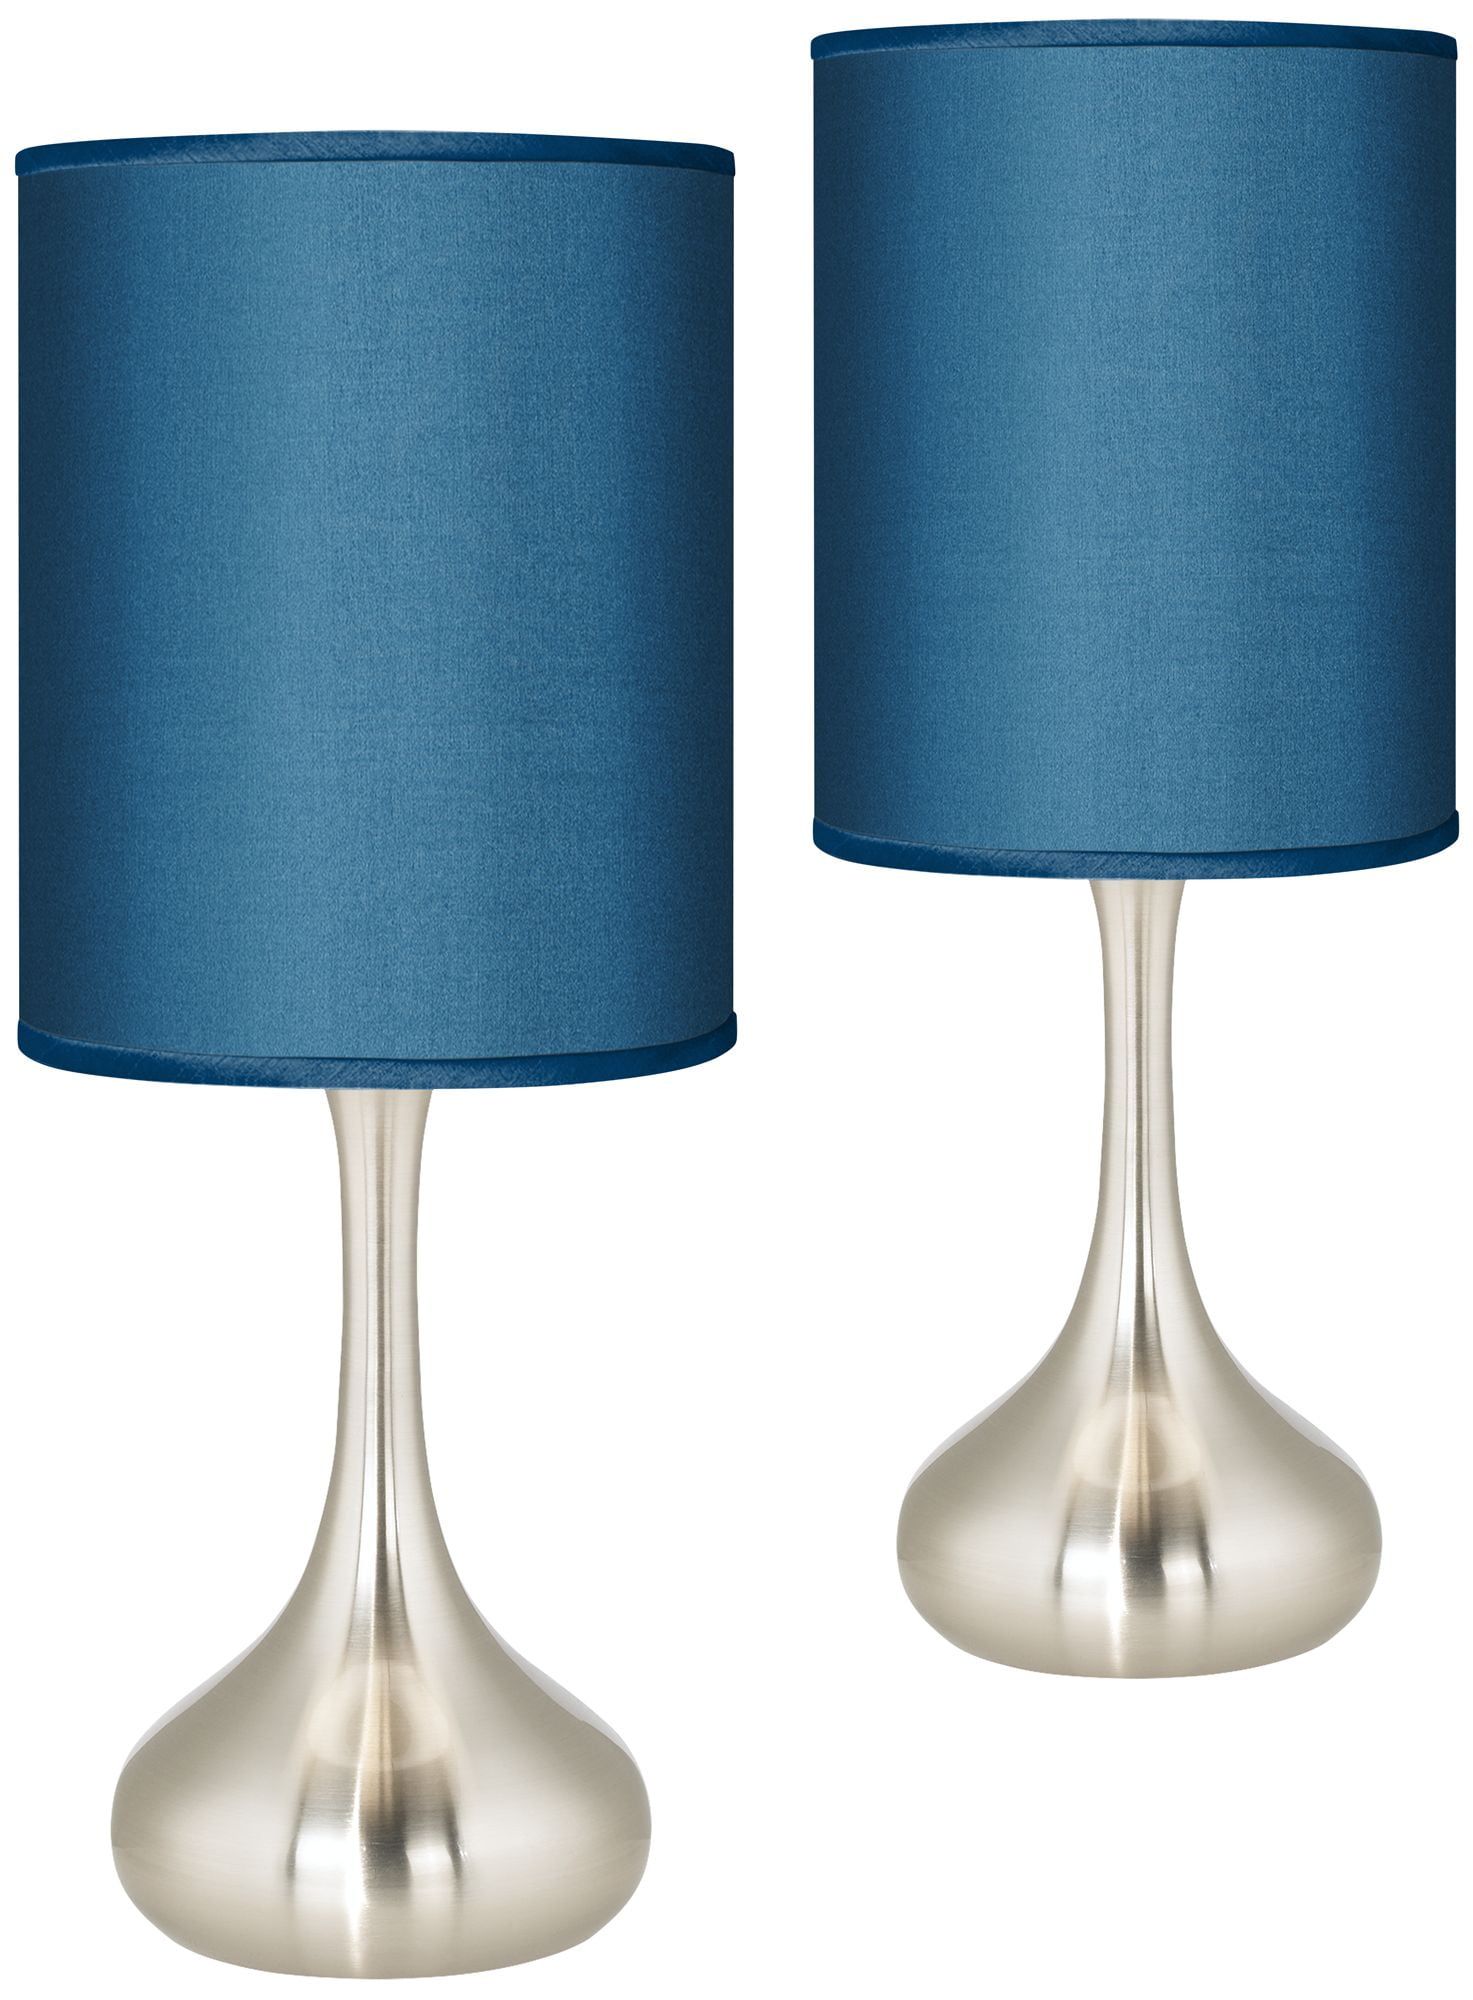 ... Light Accents Touch Lamps Set of 2 Bedroom Side Table Lamps Brushed Nickel 